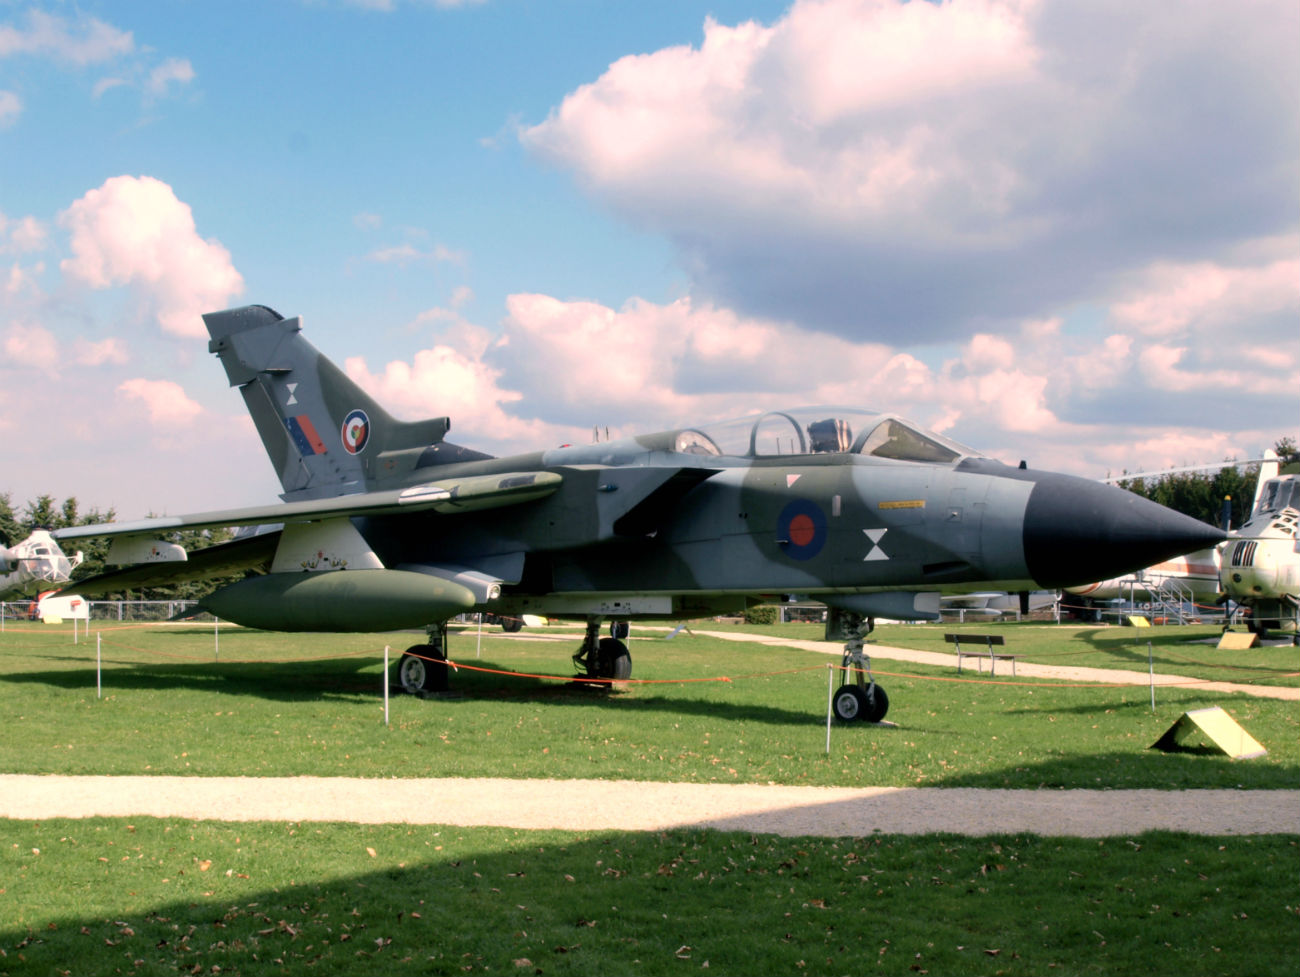 Captivating Images of Panavia Tornado on display